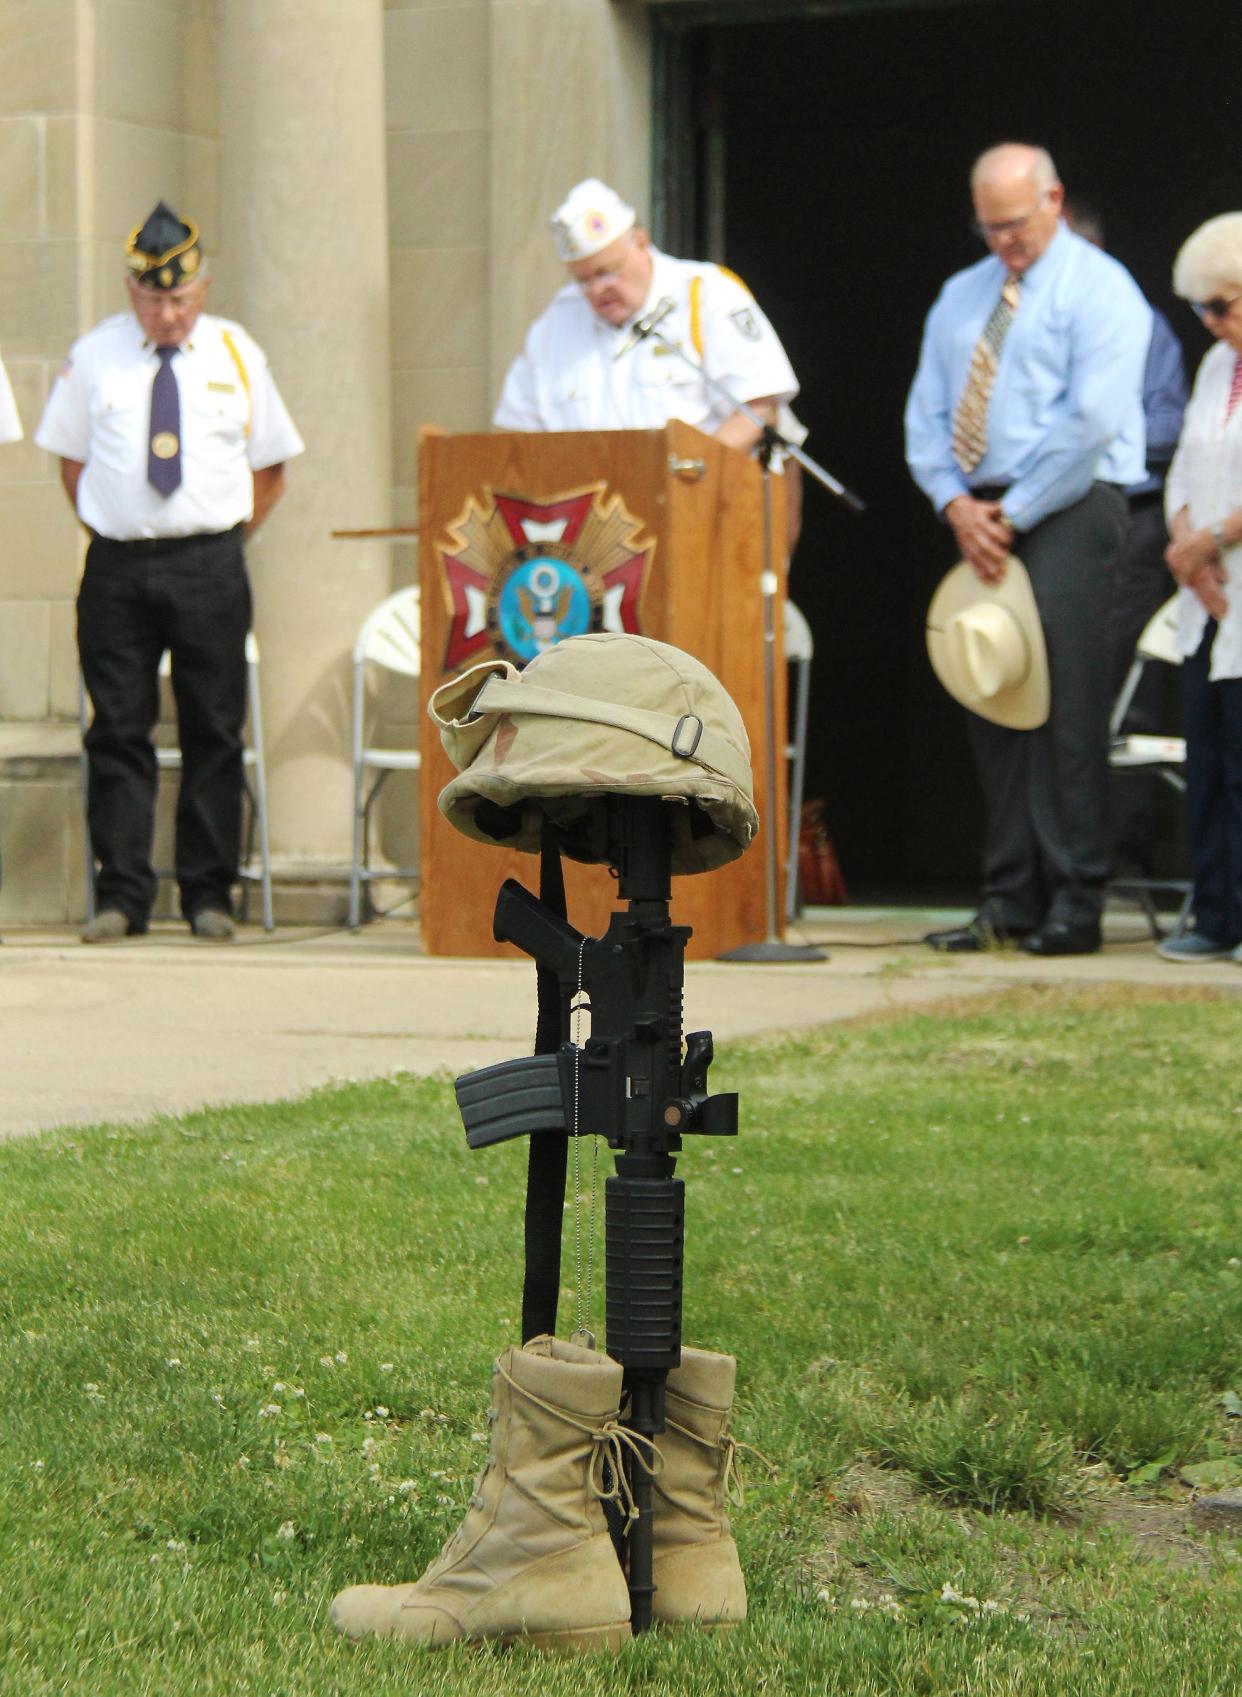 Terry Norgaard of the American Legion reads the POW Prayer behind the battle cross display during the Memorial Day service Monday at Southside Cemetery.